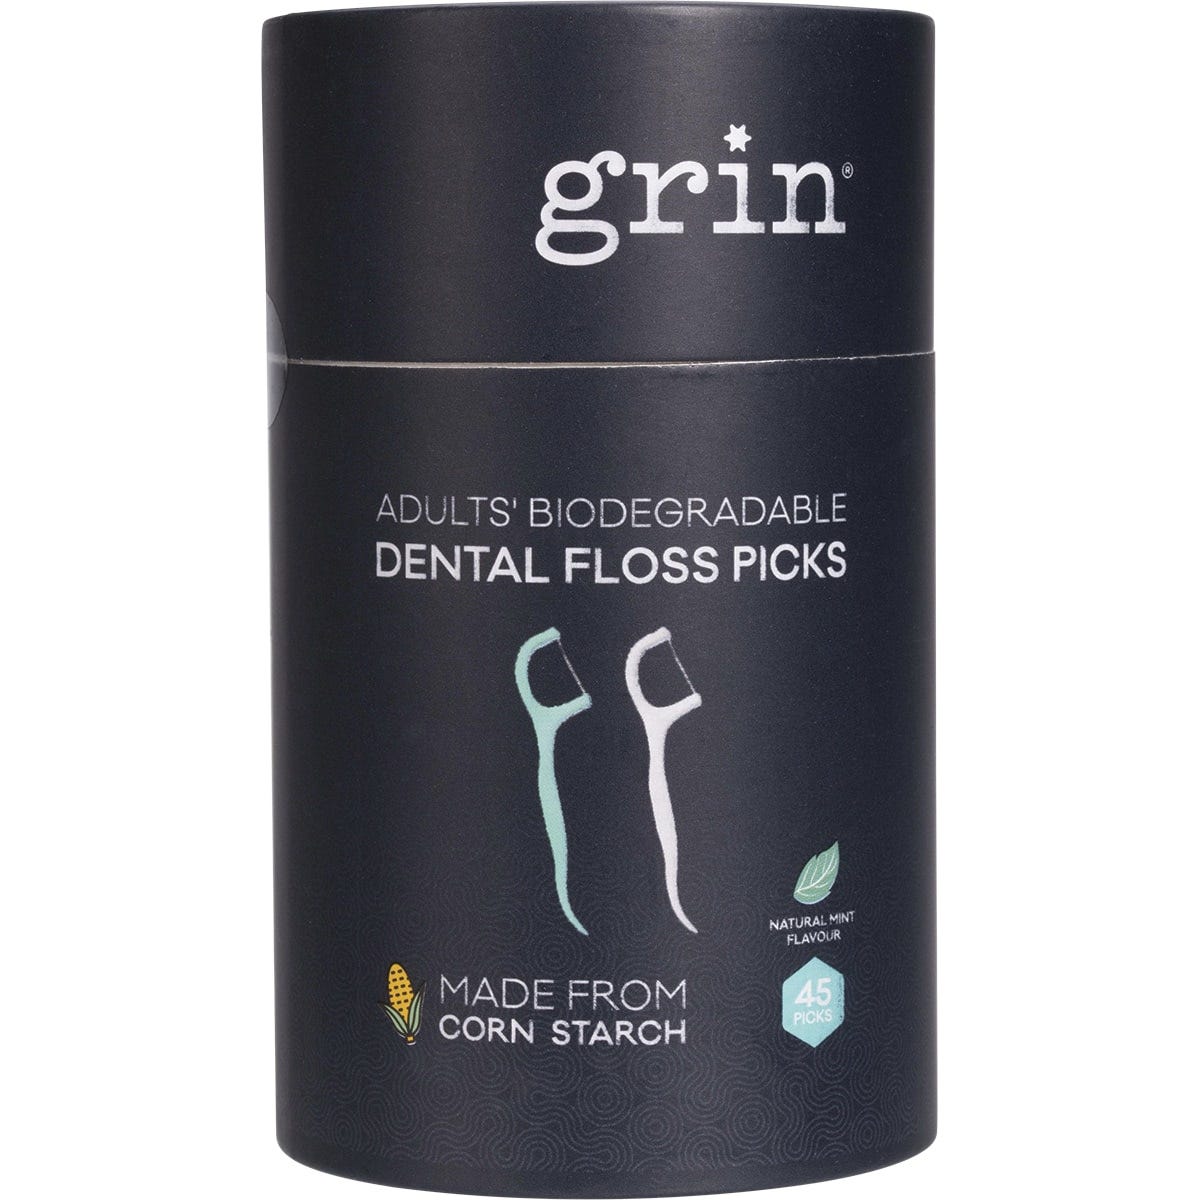 Grin Biodegradable Dental Floss Picks Adults 45pk - Dr Earth - Oral Care